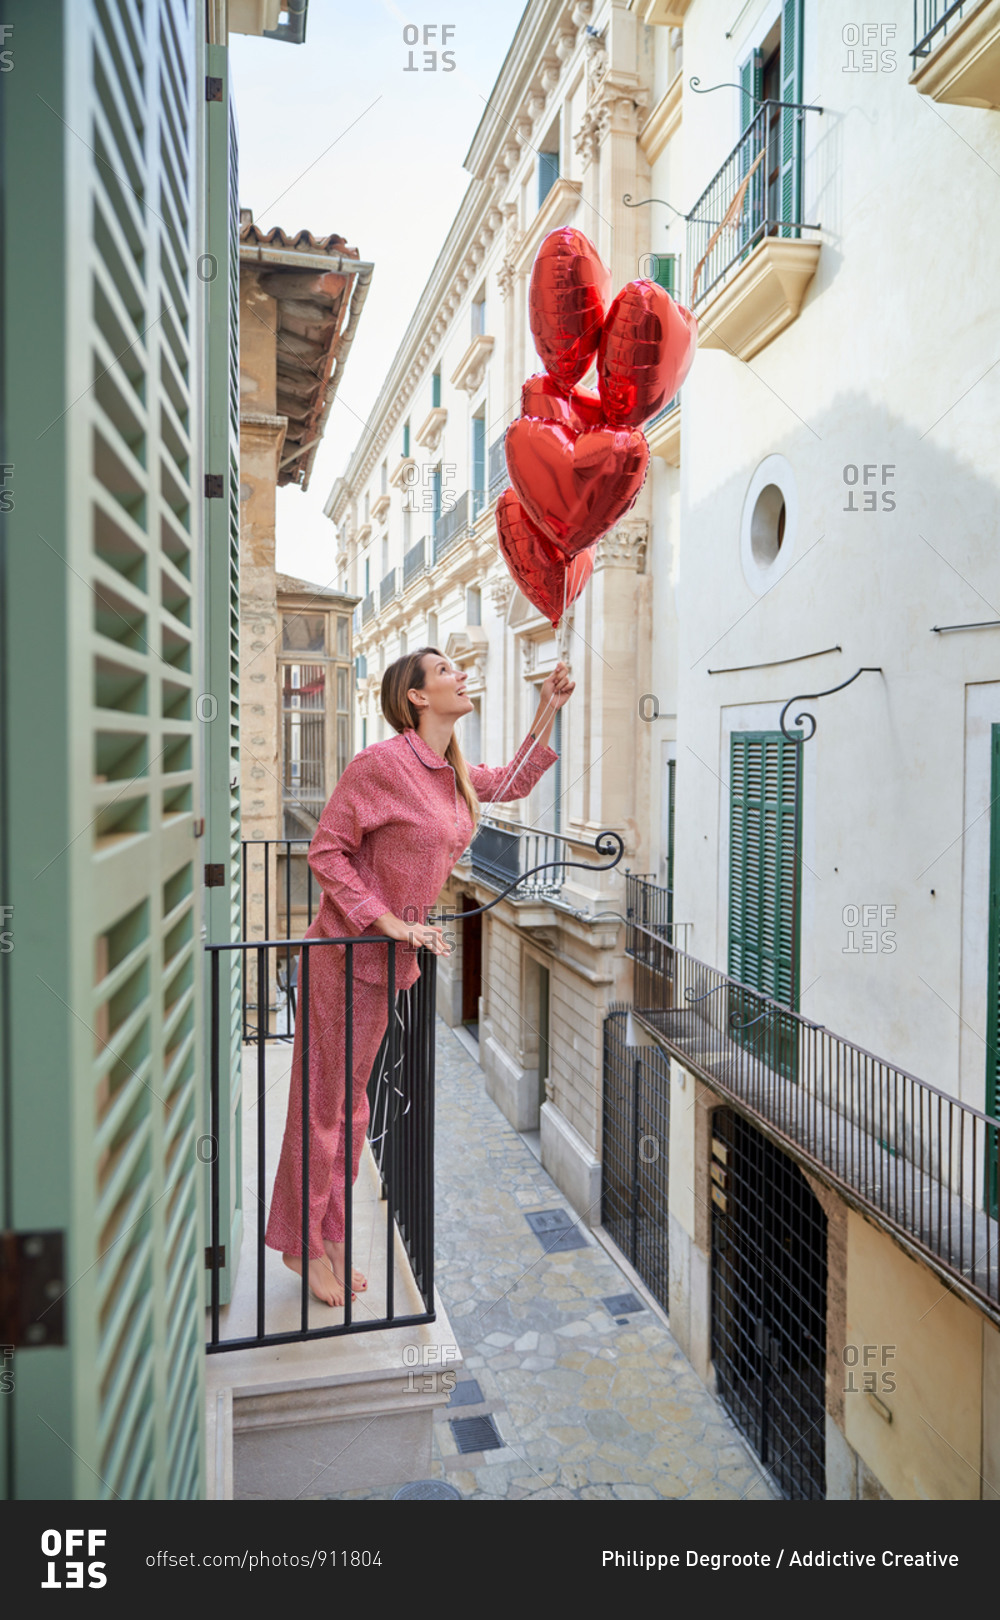 Happy lady in pink sleepwear with vivid red heart shape balloons standing on balcony leaning on metal fence and looking up against facades of buildings in old town